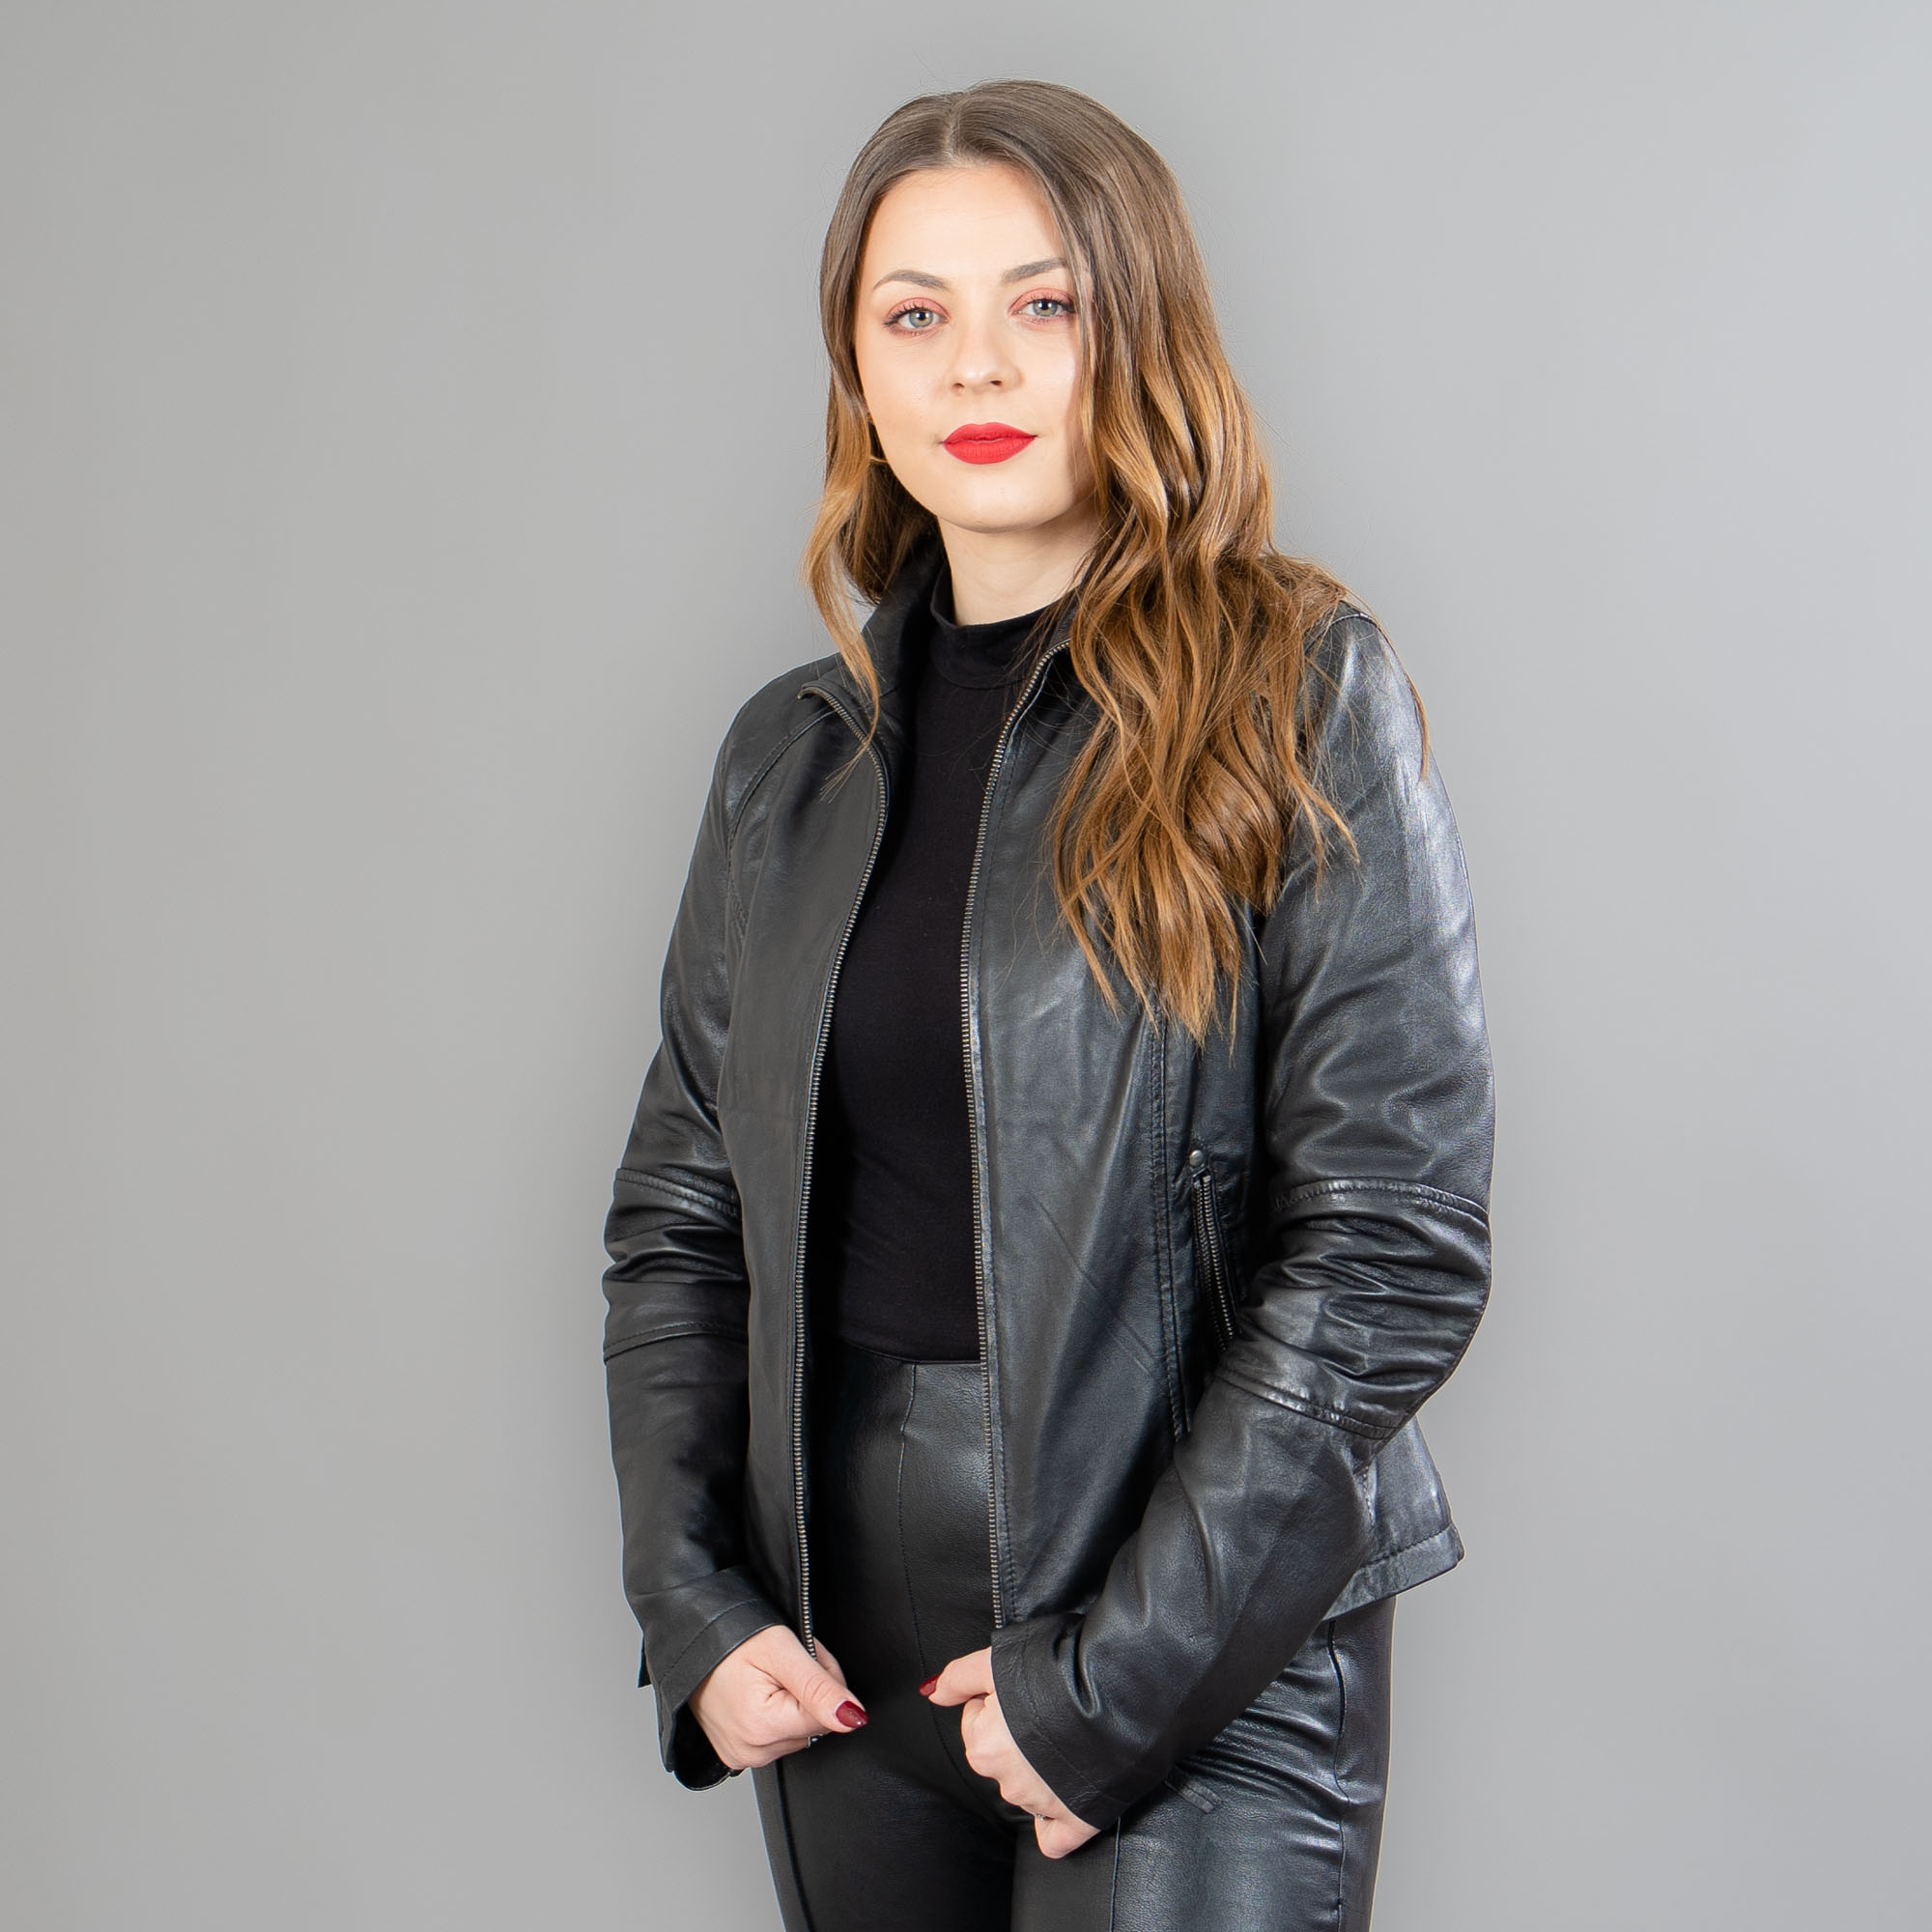 Leather jacket with a collar in black color